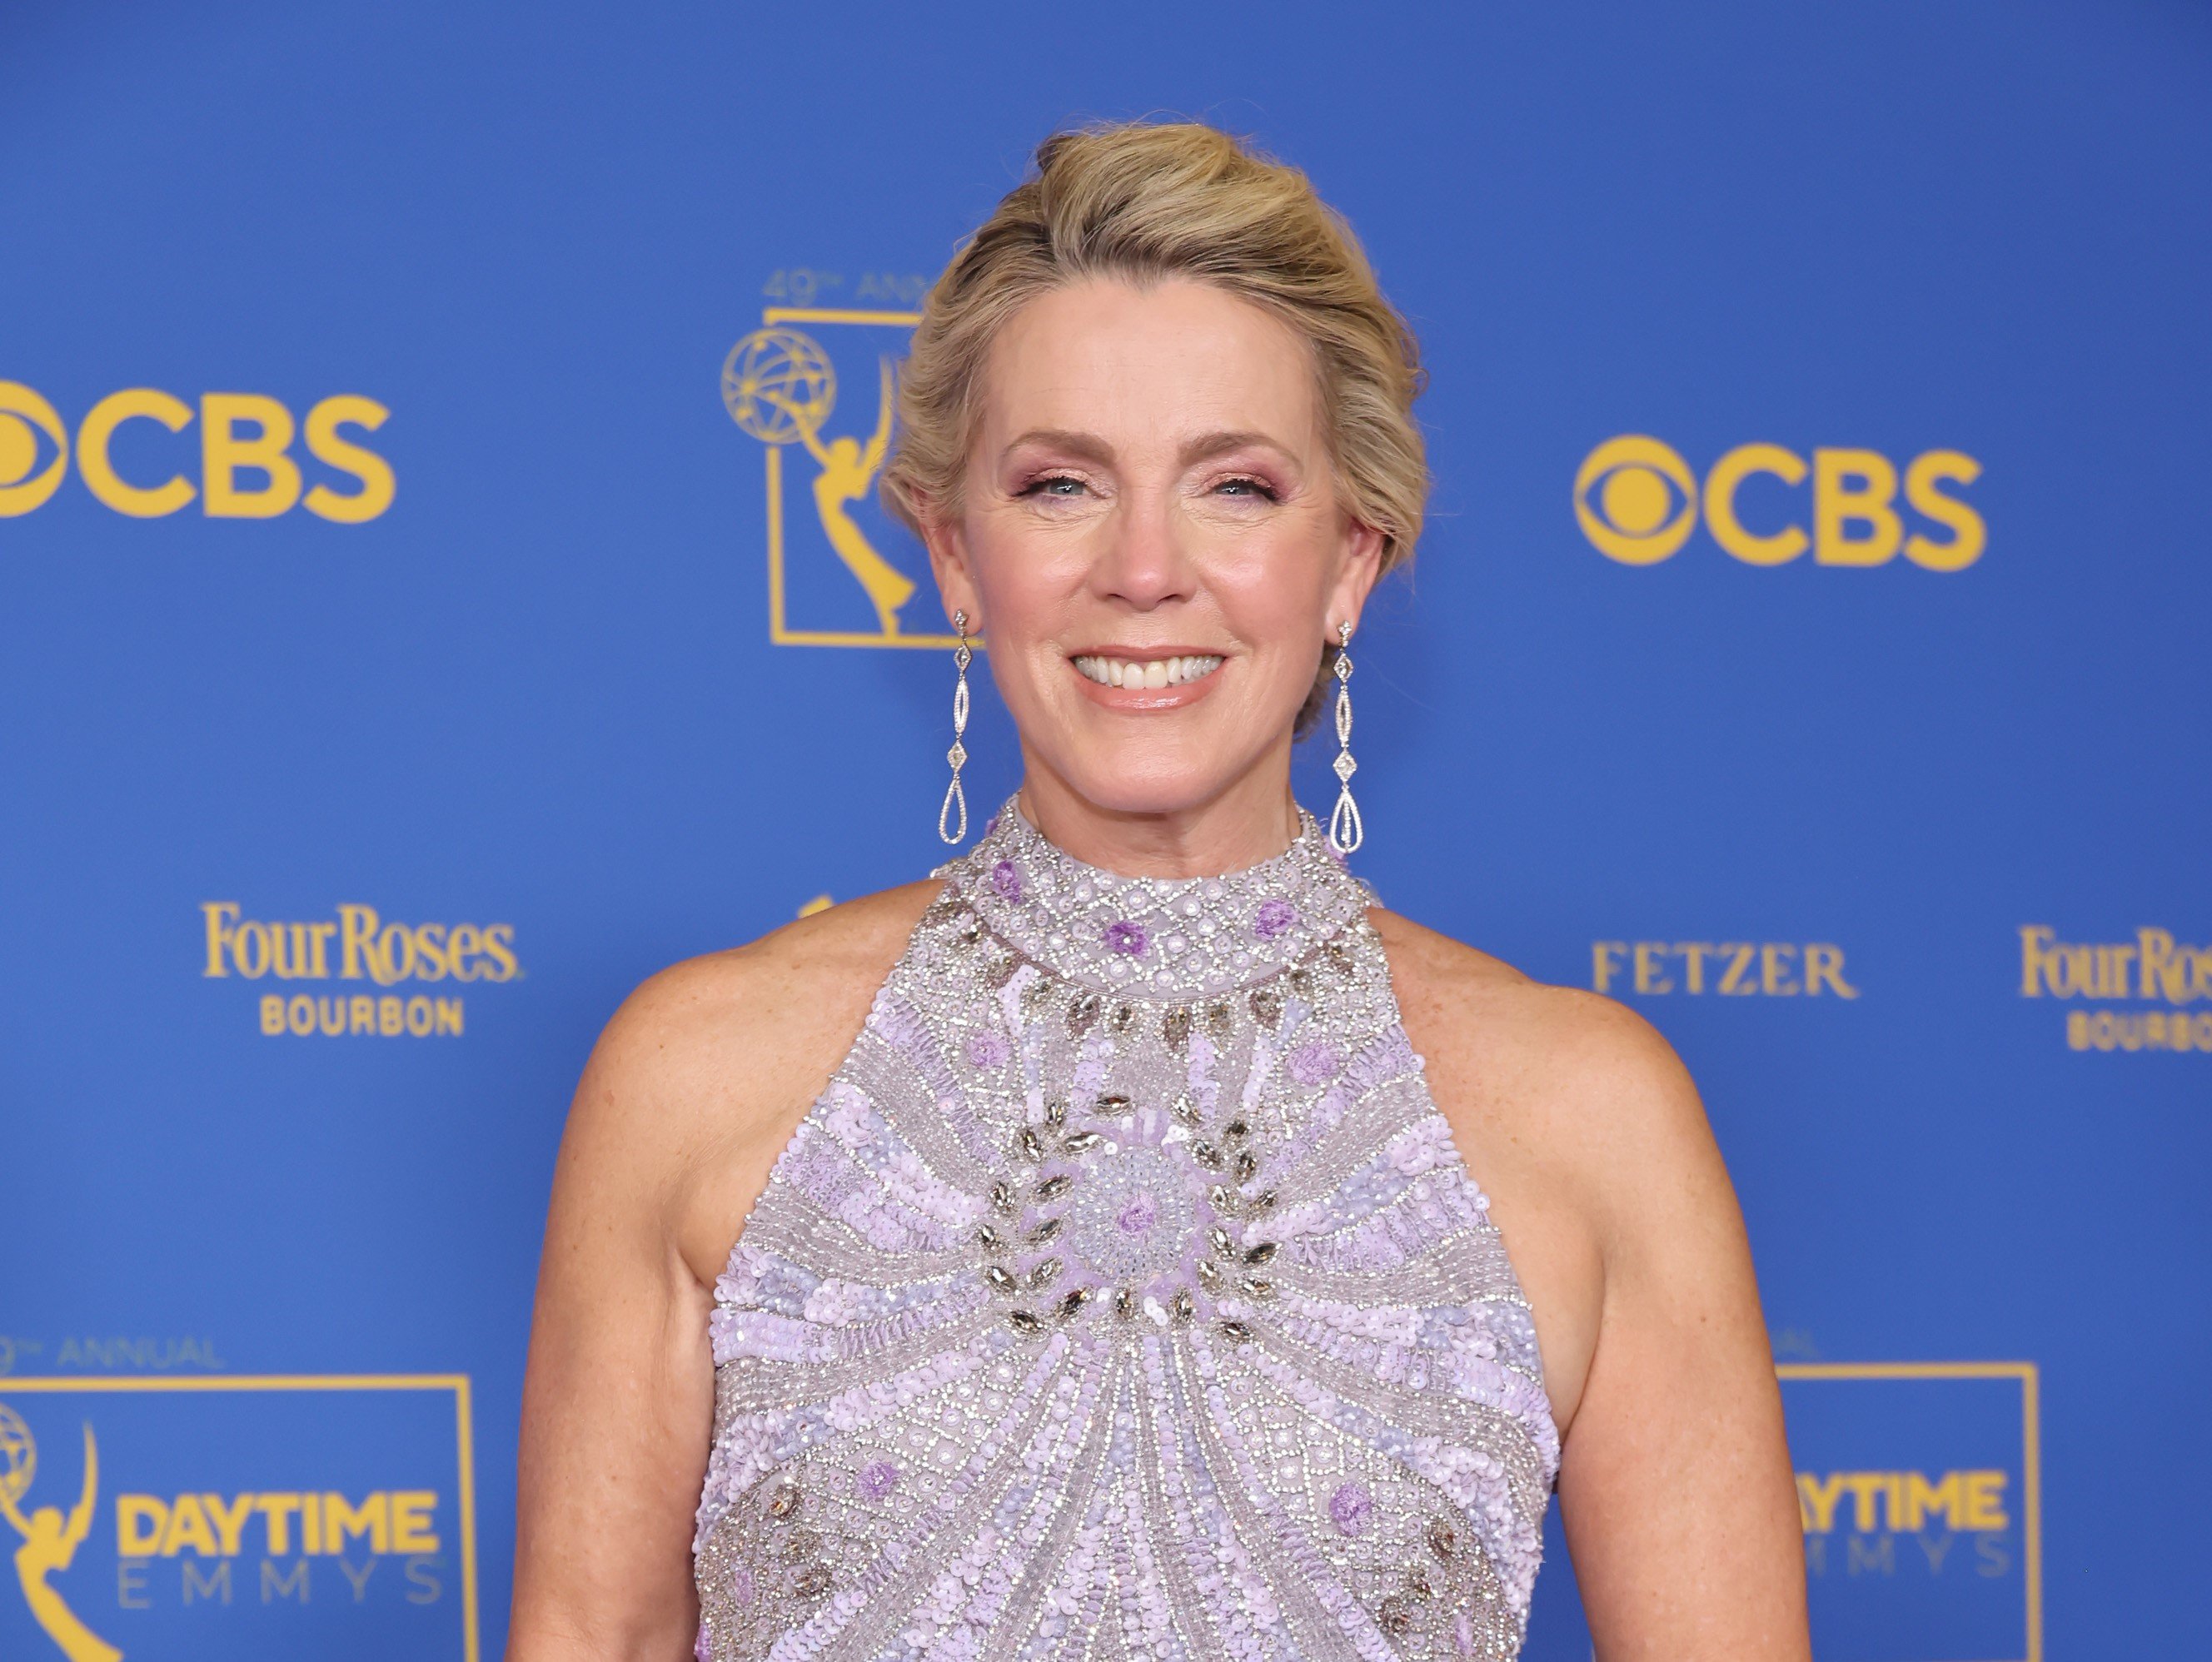 Deborah Norville at the 49th Daytime Emmy Awards in 2022, in Pasadena, California. | Source: Getty Images